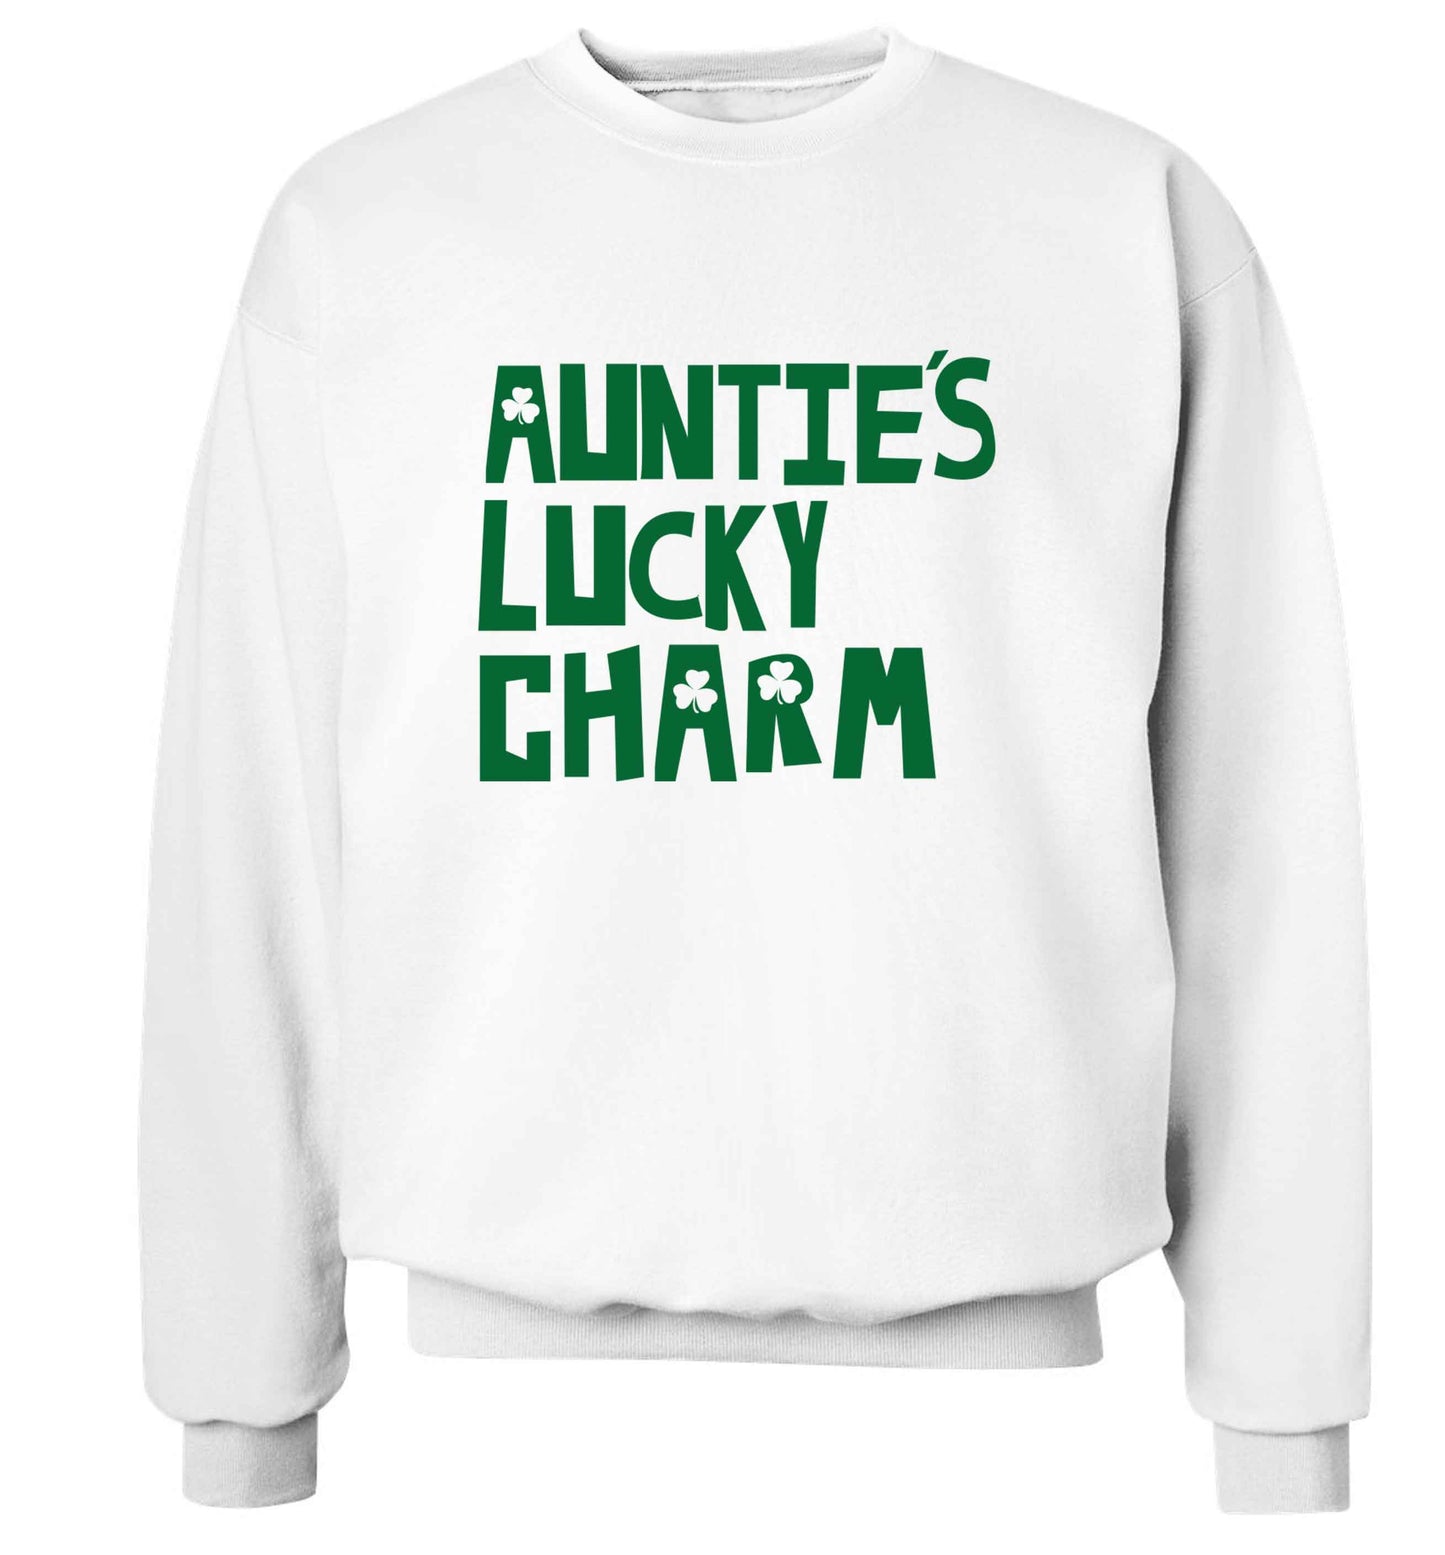 Auntie's lucky charm adult's unisex white sweater 2XL